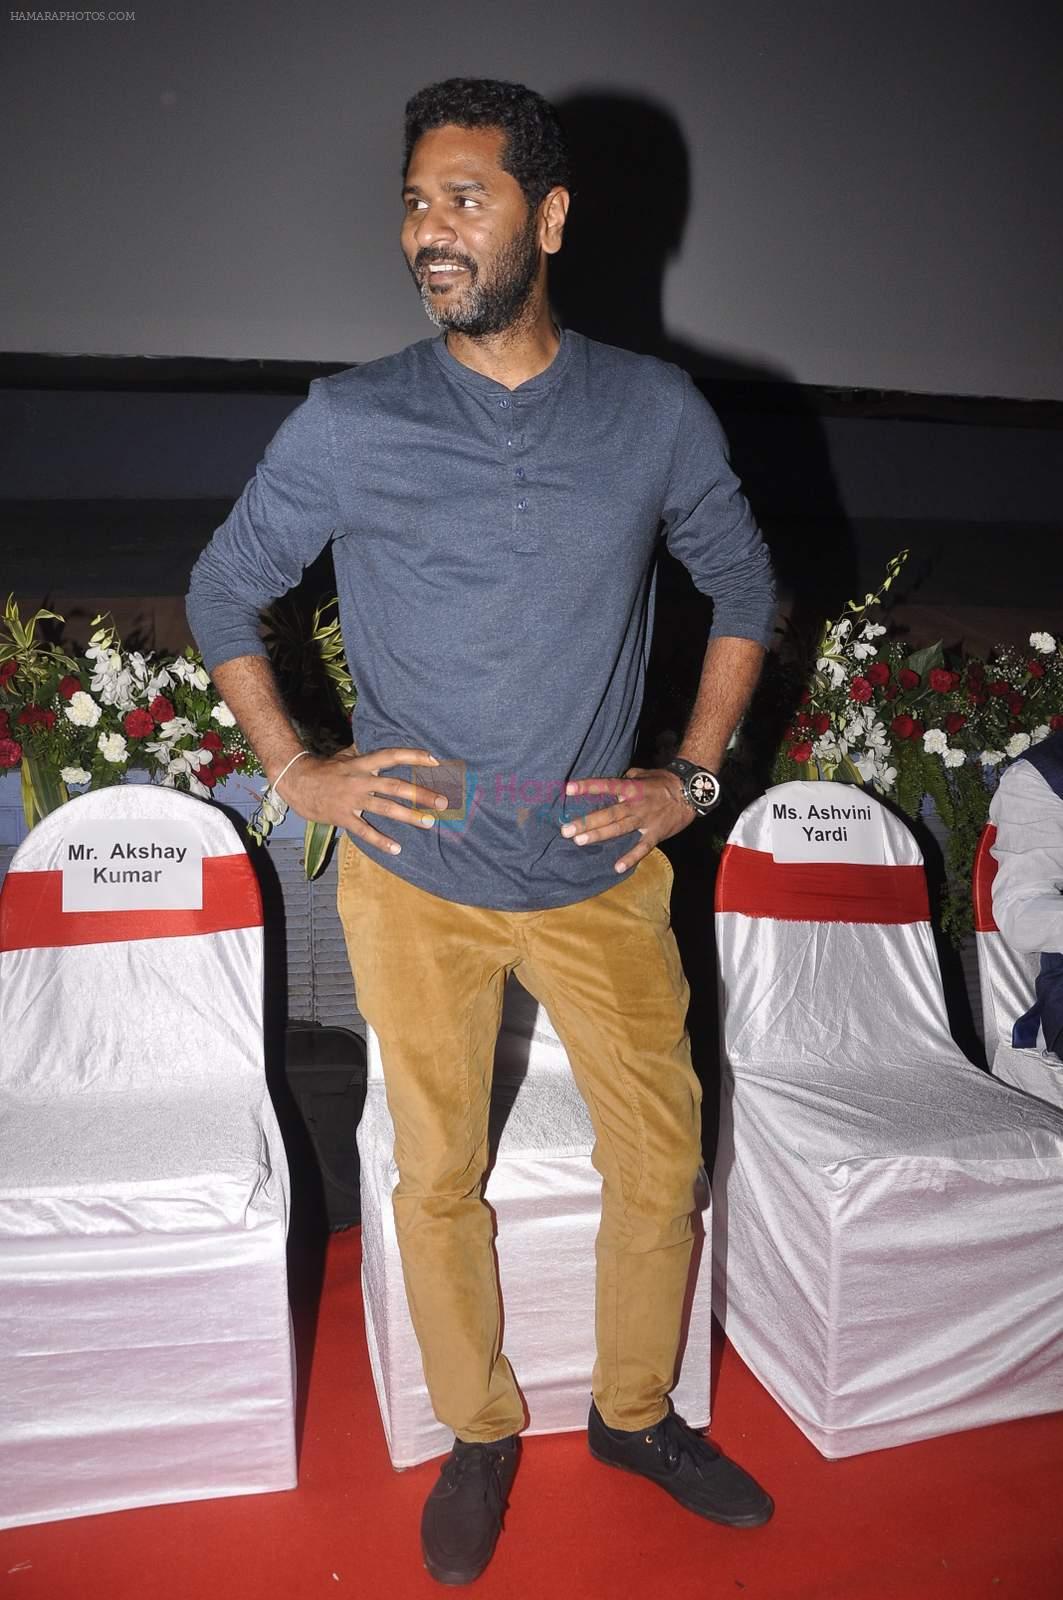 Prabhu Deva at Singh is Bling screening hosted by Bawas in Chandan on 1st Oct 2015